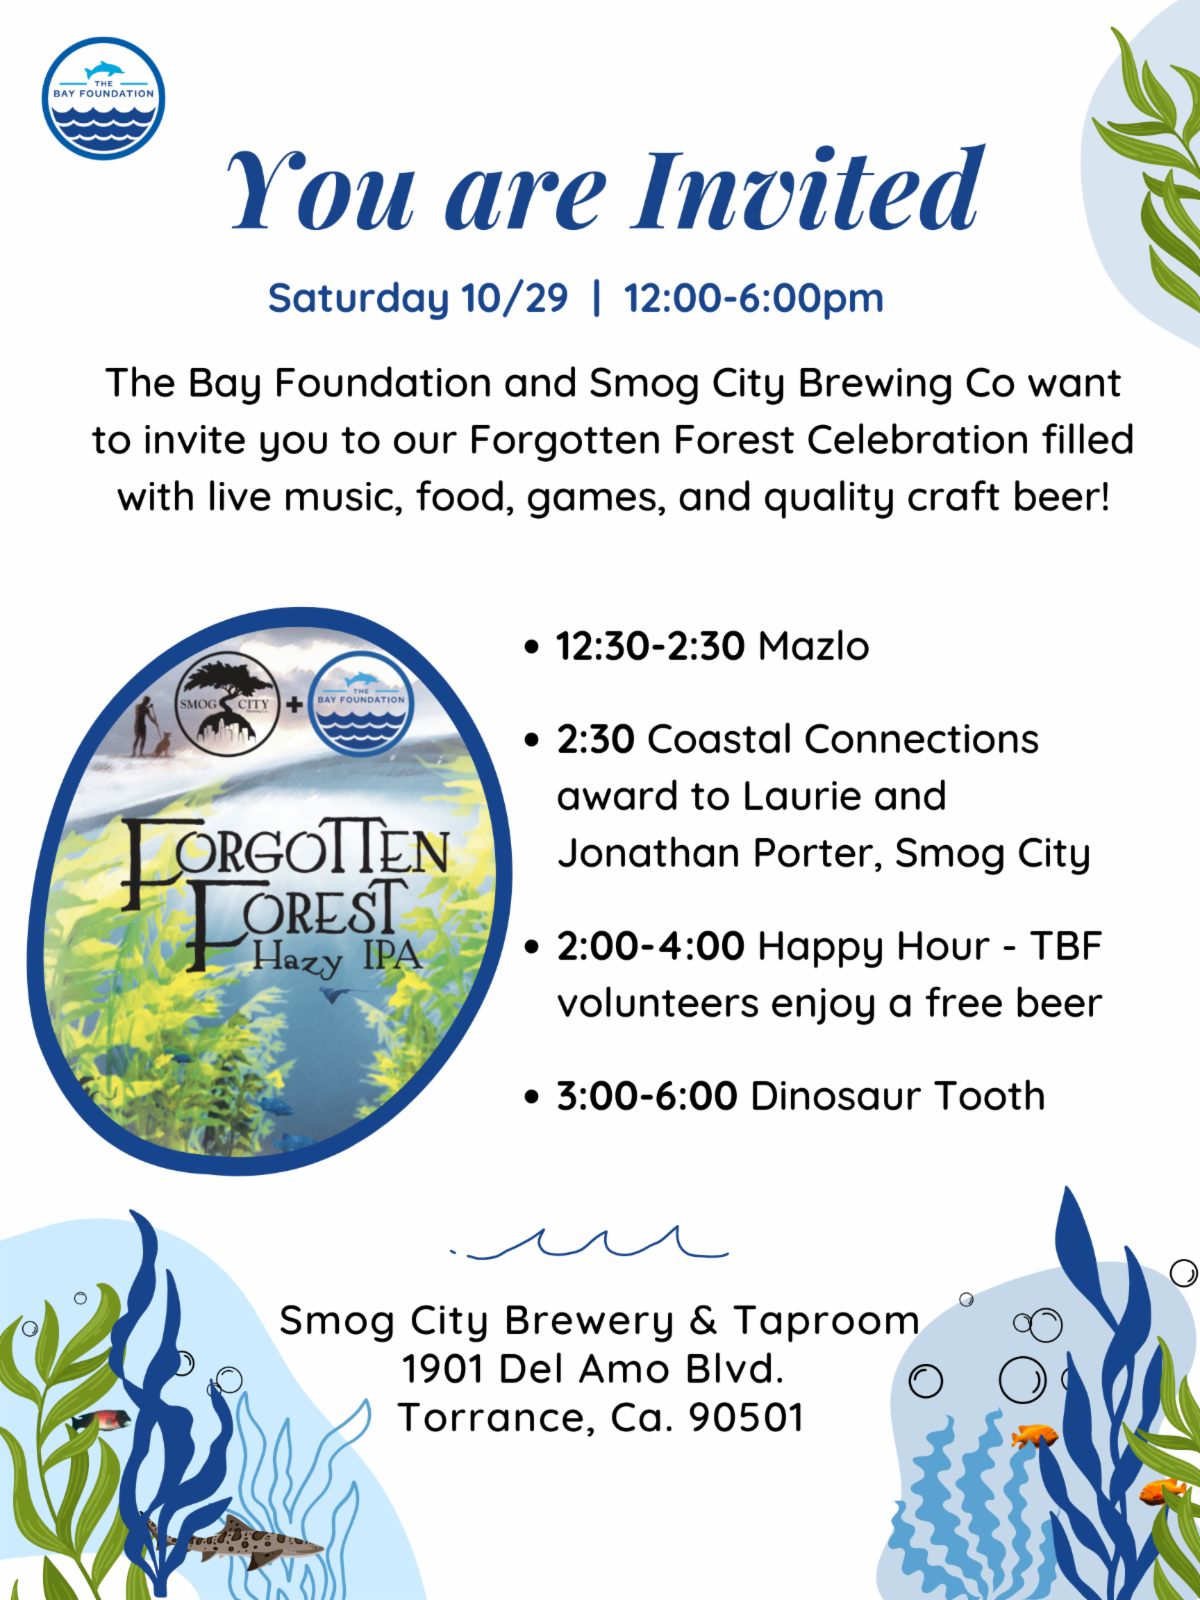 Forgotten Forest Celebration invite with Smog City Brewing Co. and The Bay Foundation